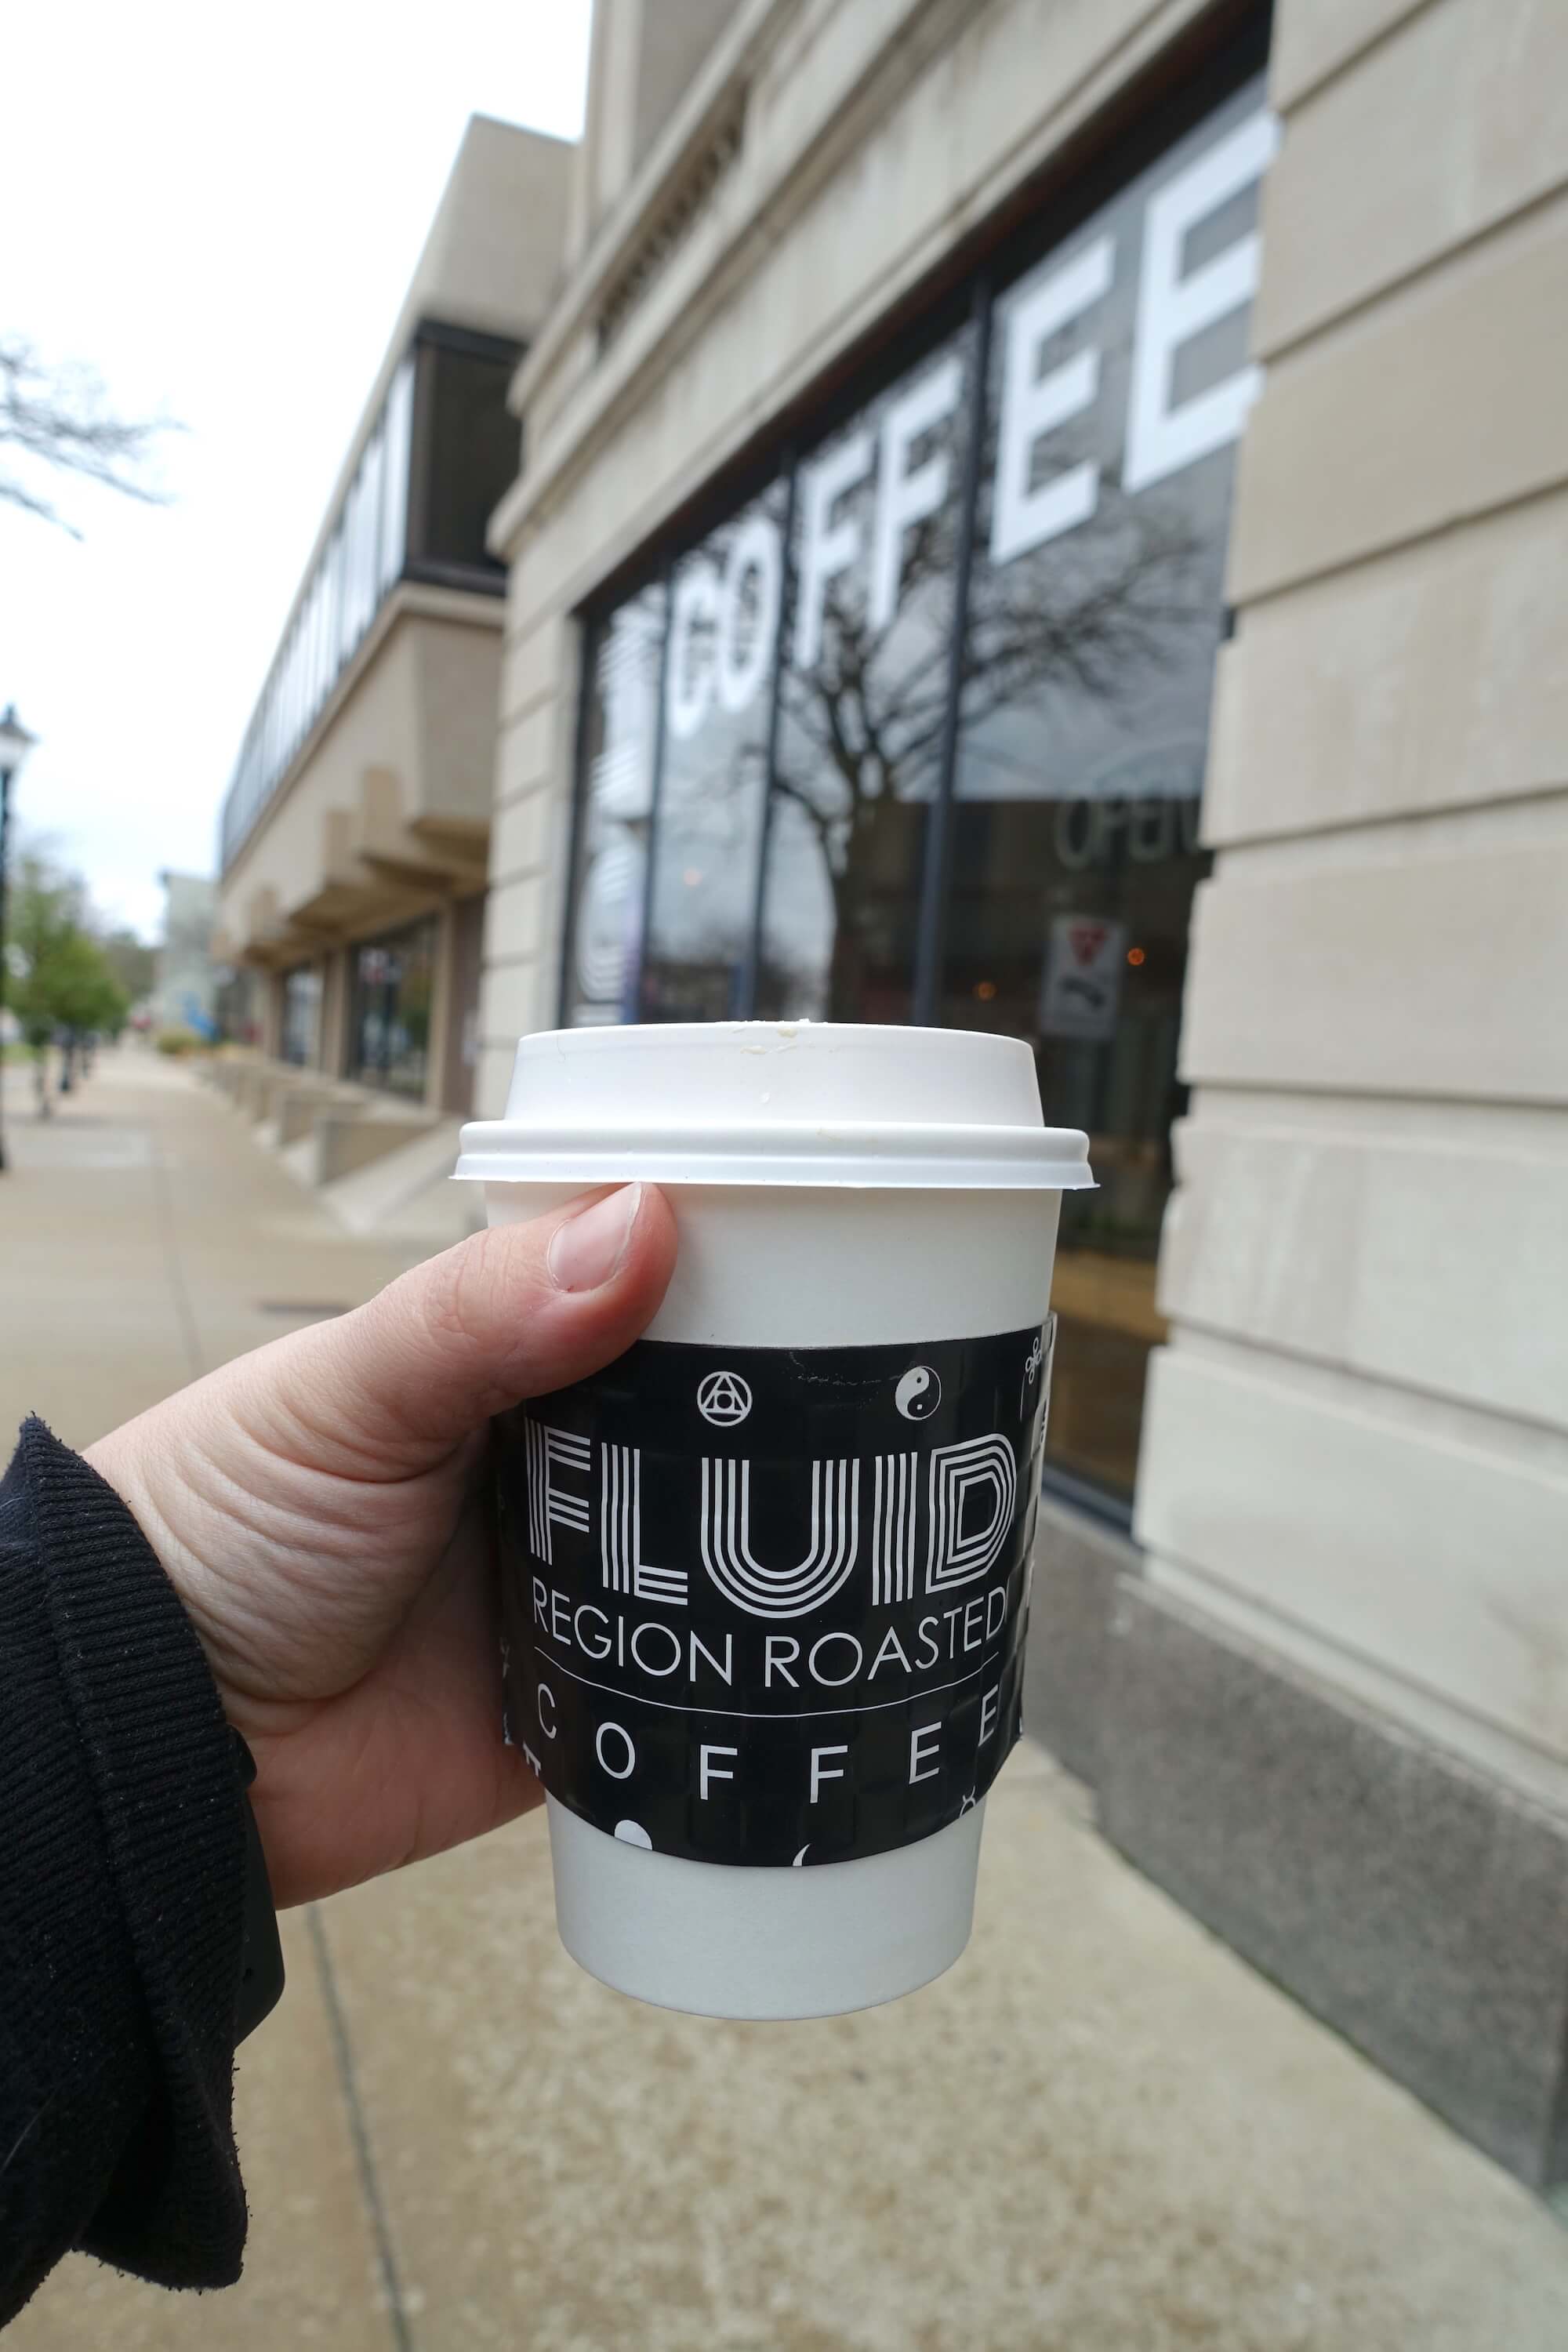 A coffee cup held up in front of a white building with the word COFFEE out of focus in the window. The sleeve of the coffee cup says Fluid Region Roasted Coffee - Best things to do near Indiana Dunes National Park